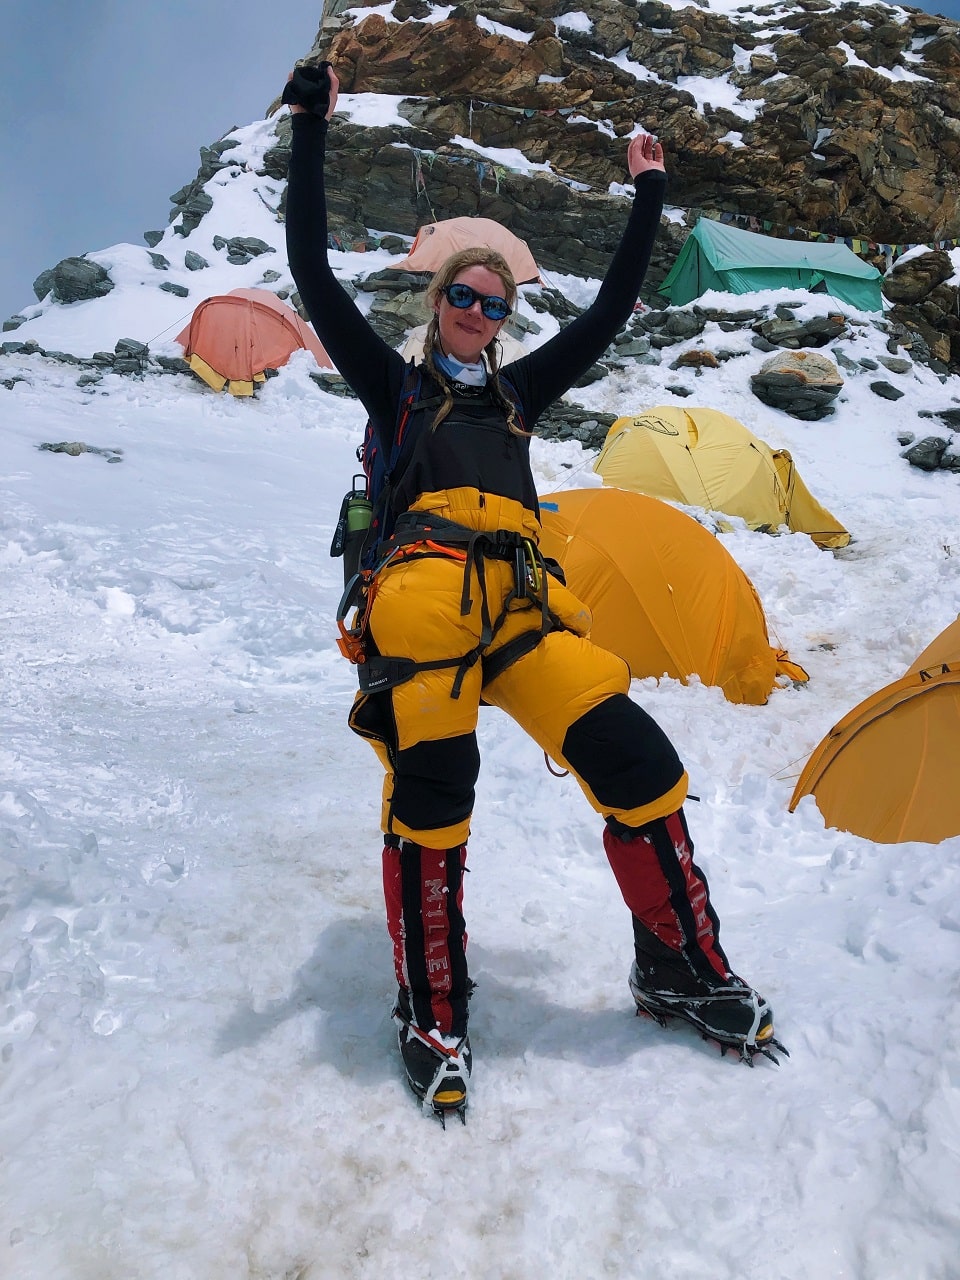 Claire Mackay at High Camp after a successful climb of Mera Peak